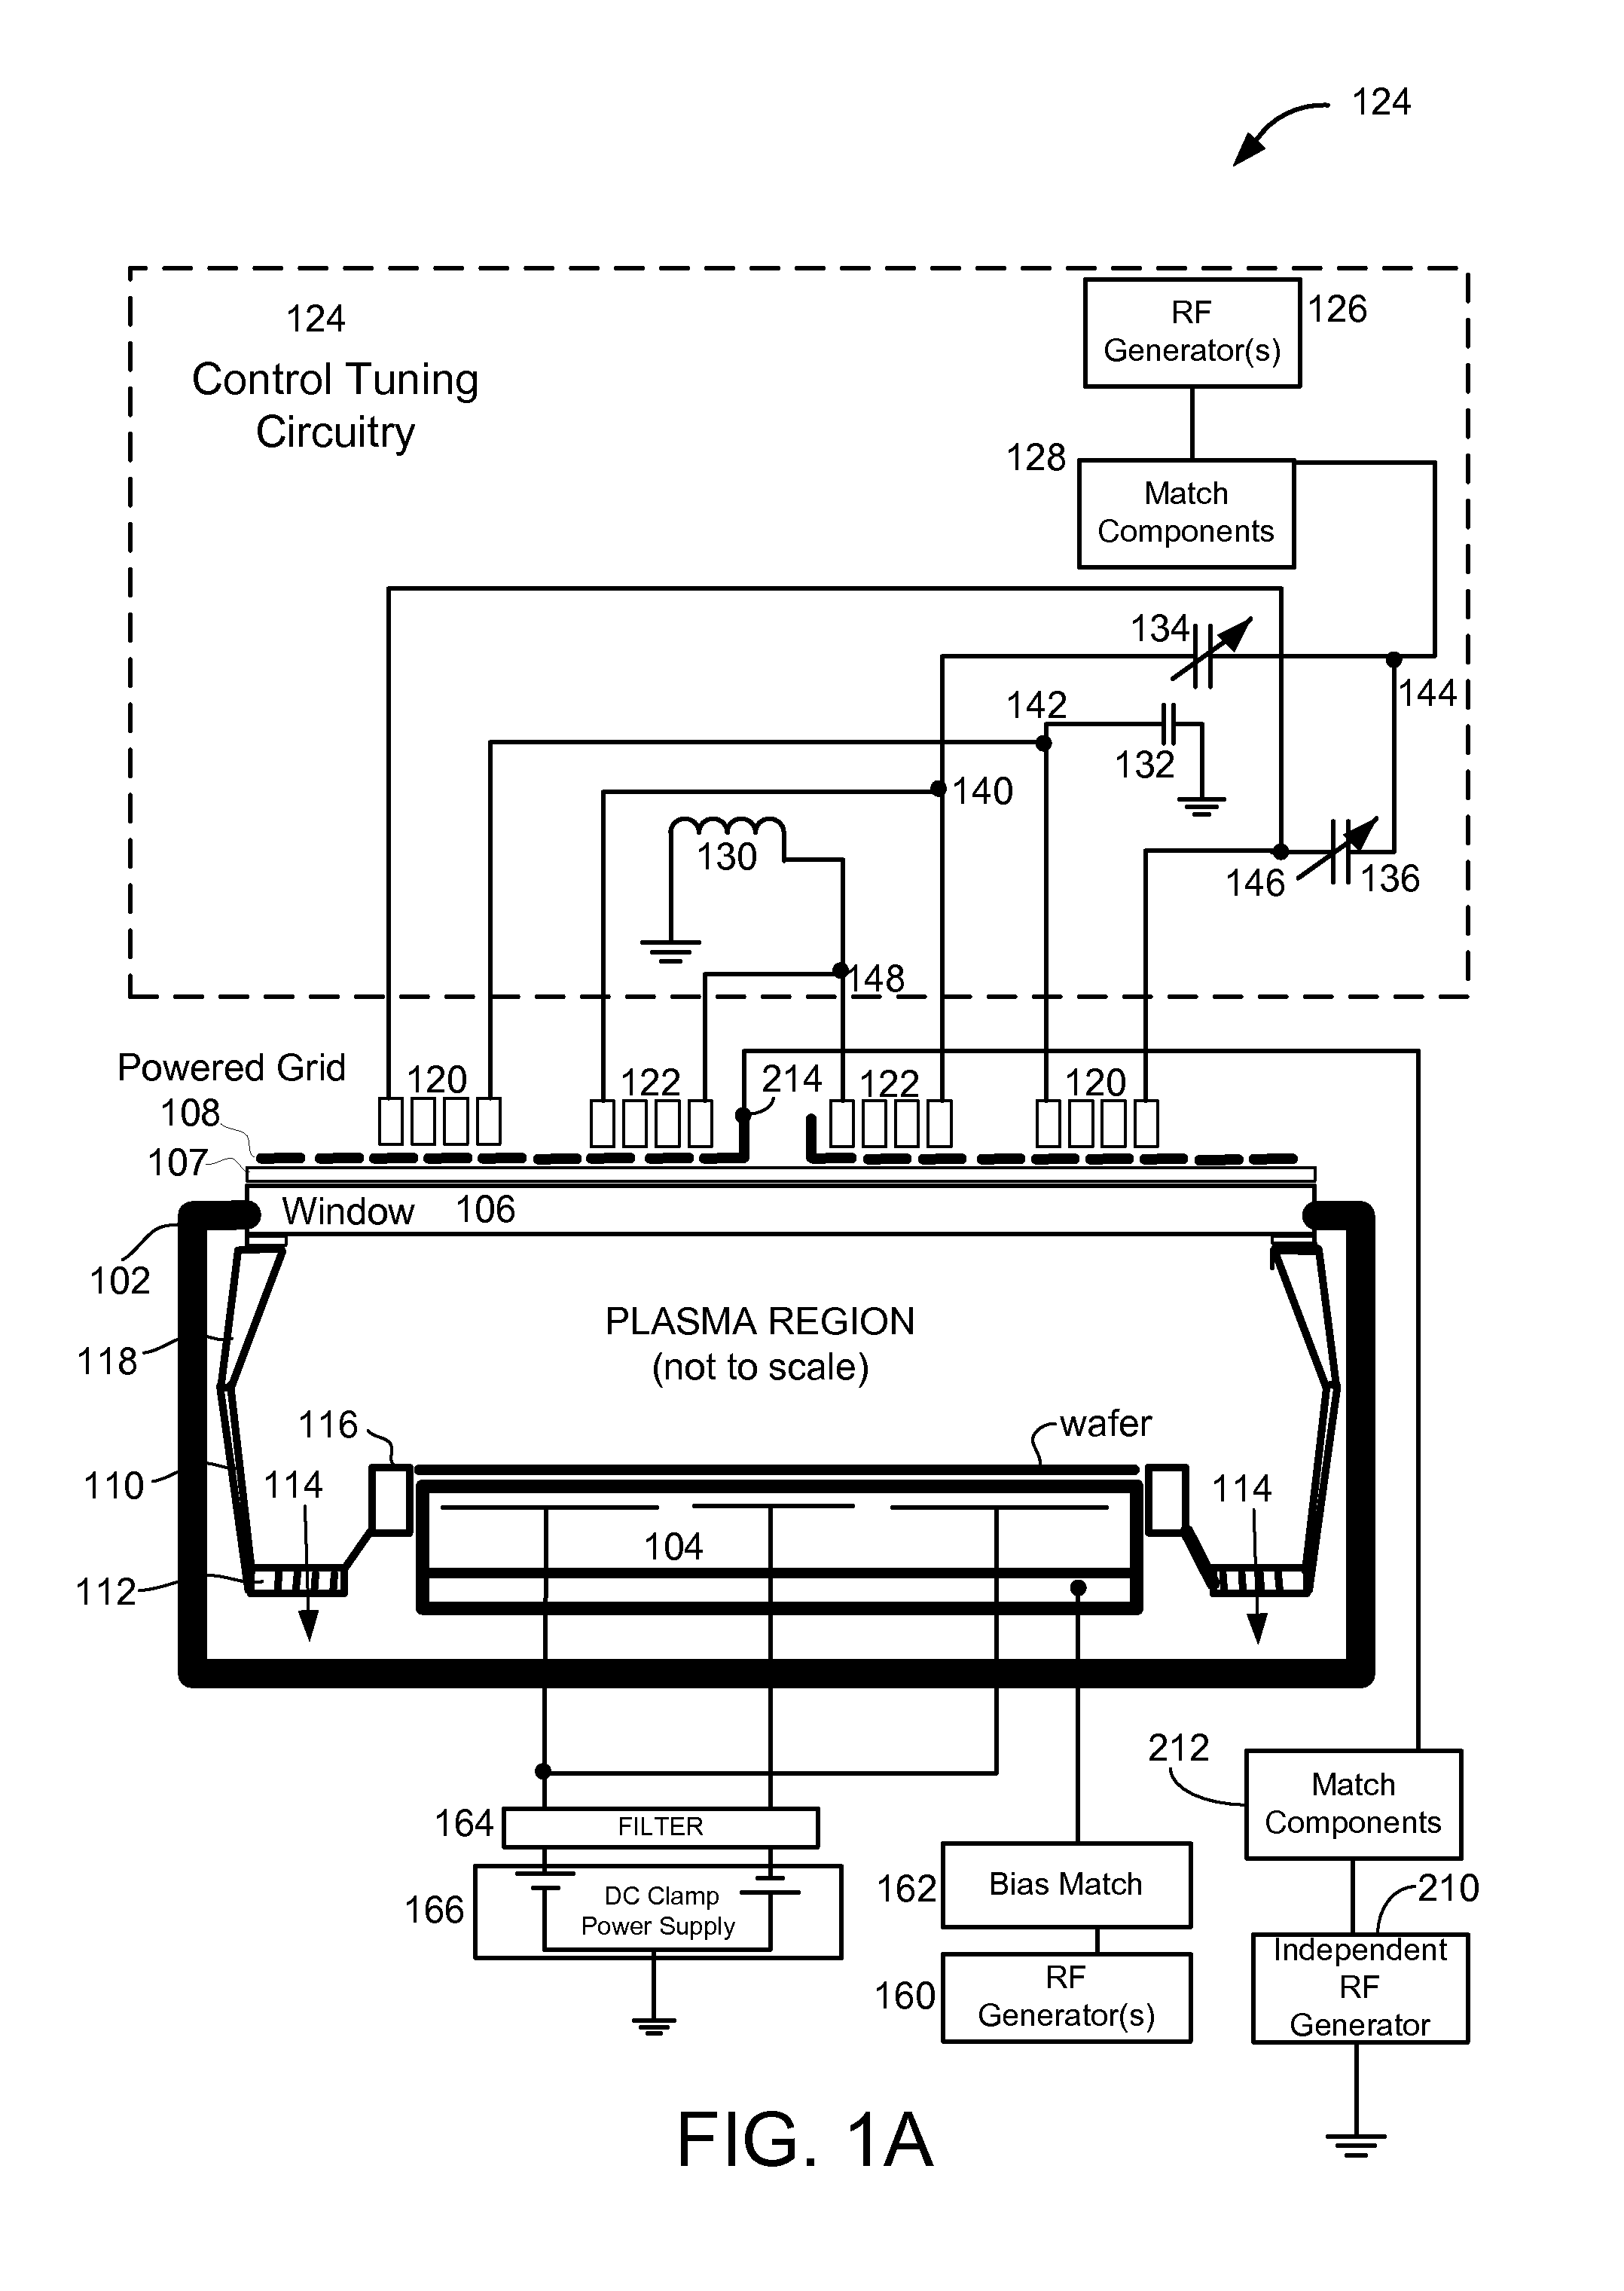 Powered grid for plasma chamber